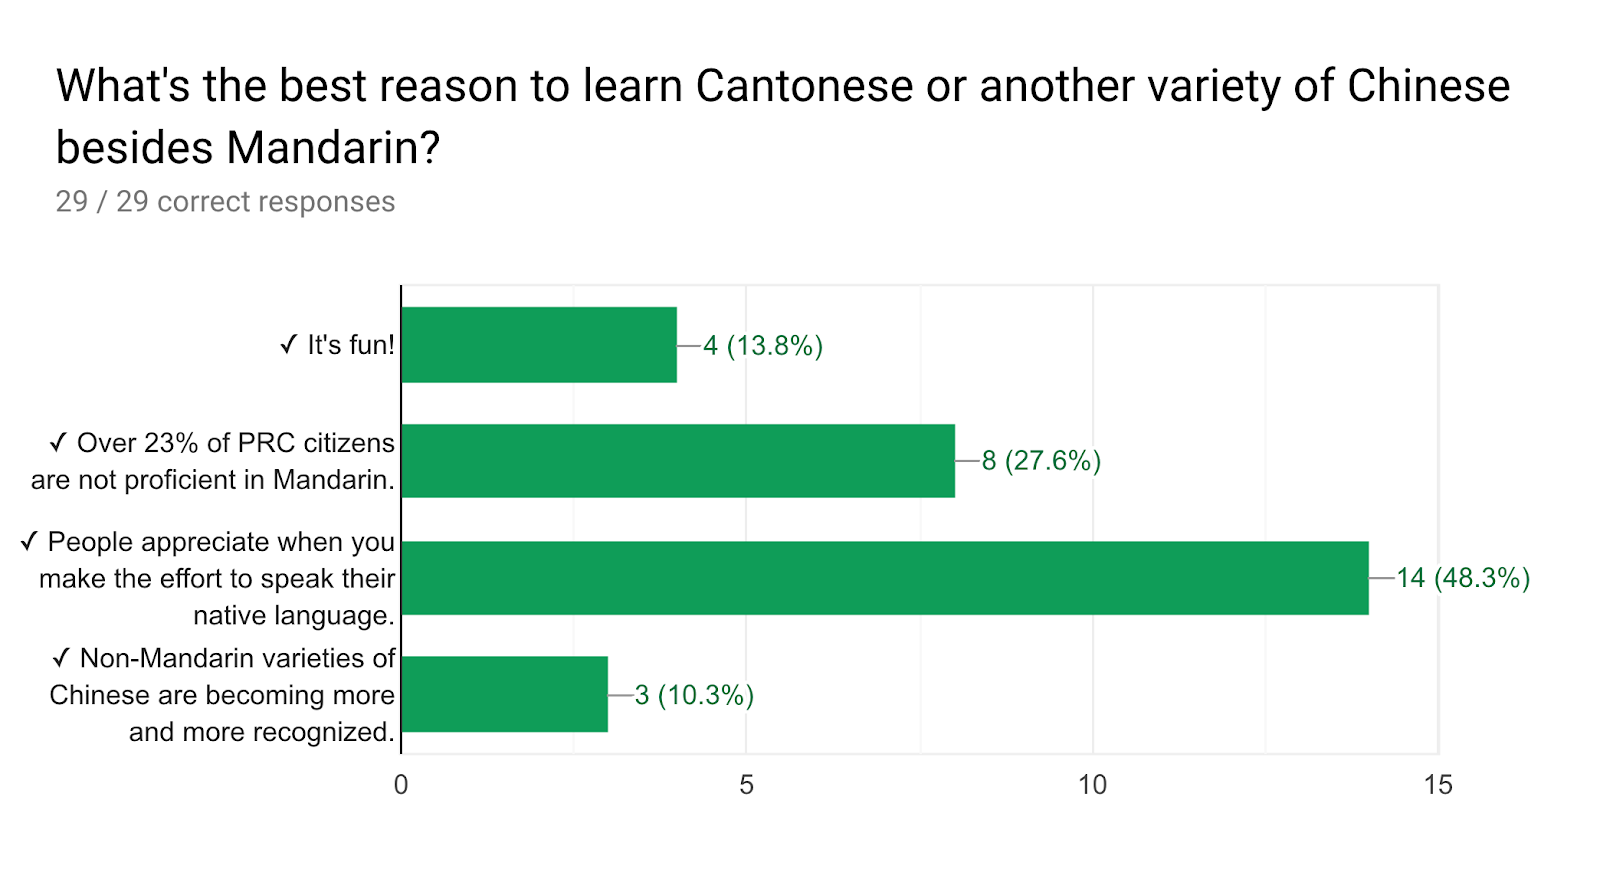 Forms response chart. Question title: What's the best reason to learn Cantonese or another variety of Chinese besides Mandarin?. Number of responses: 29 / 29 correct responses.